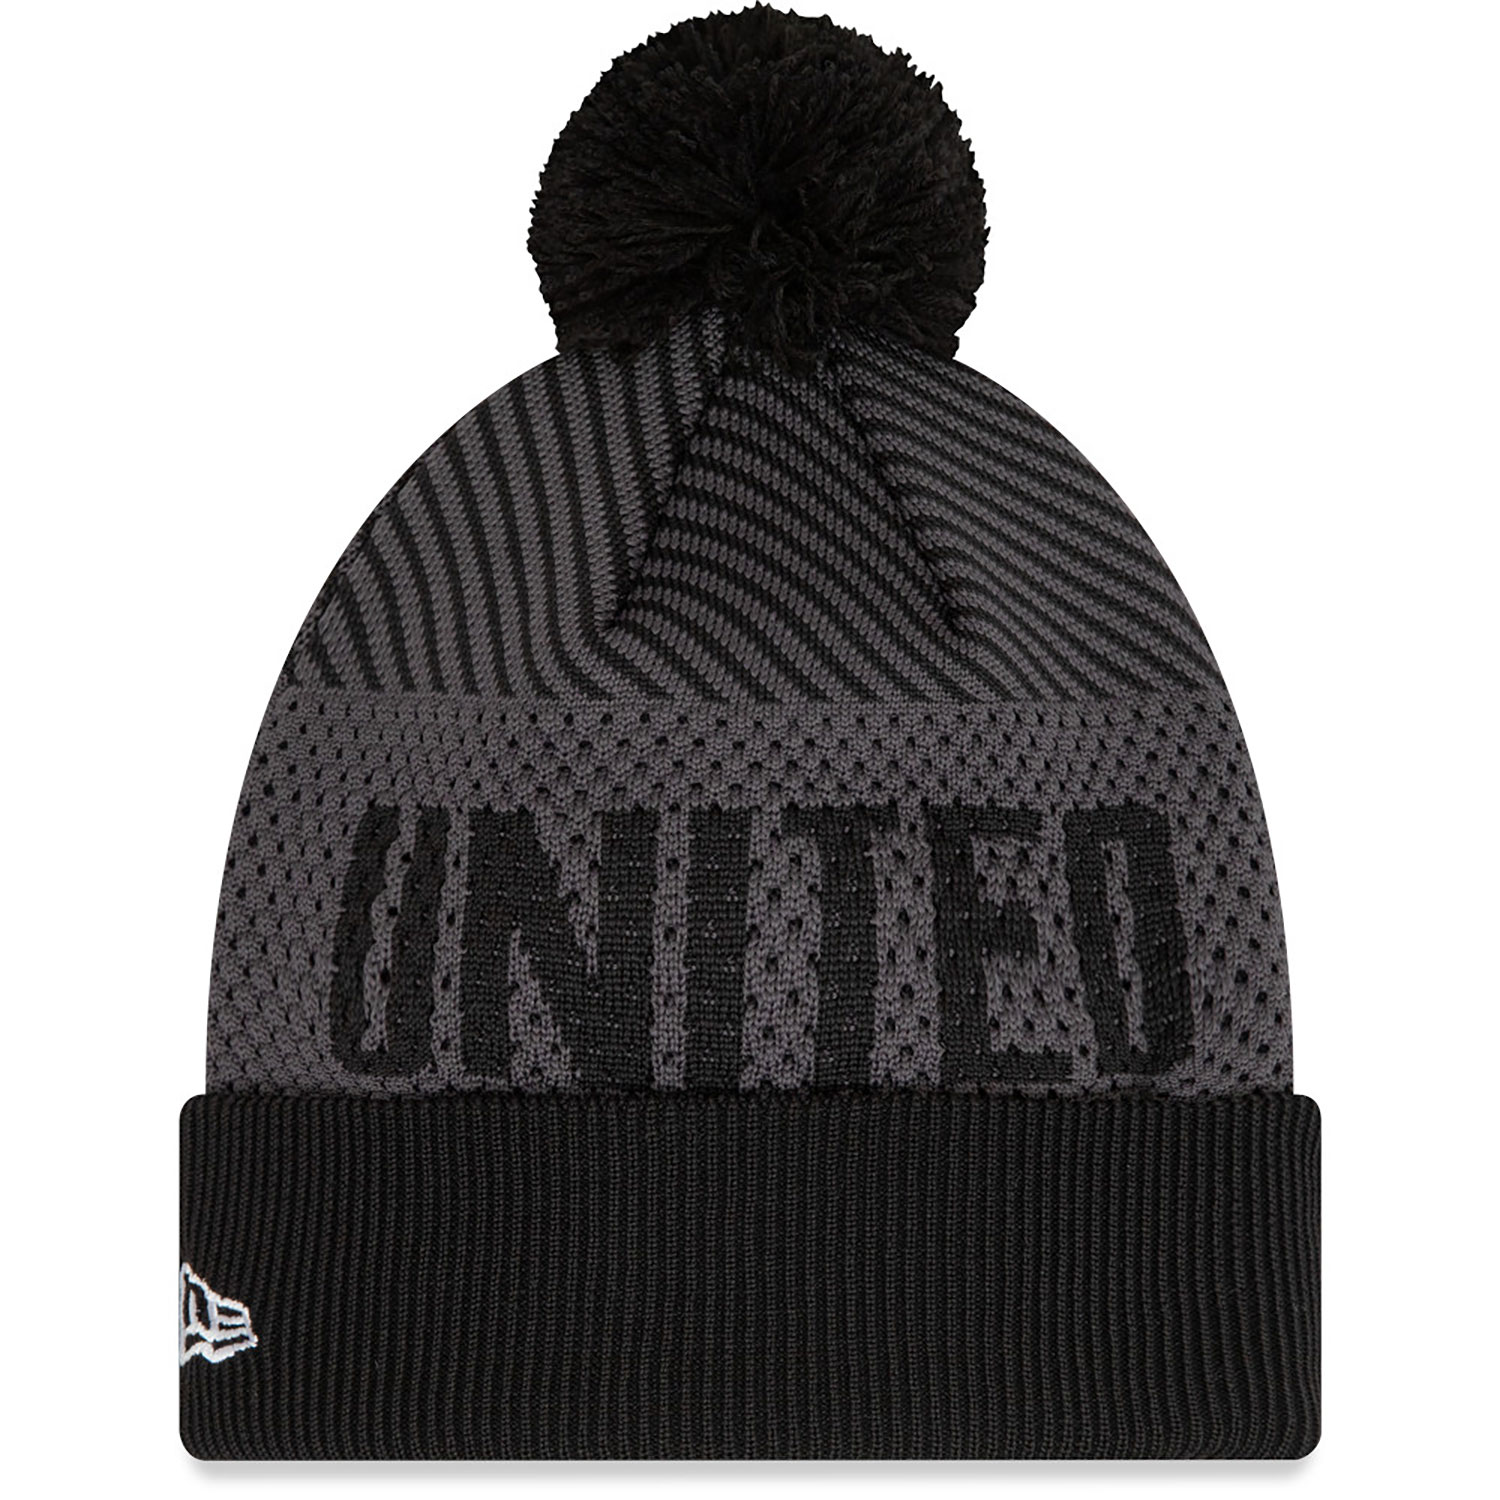 Manchester United FC Youth Engineered Grey Cuff Knit Beanie Hat